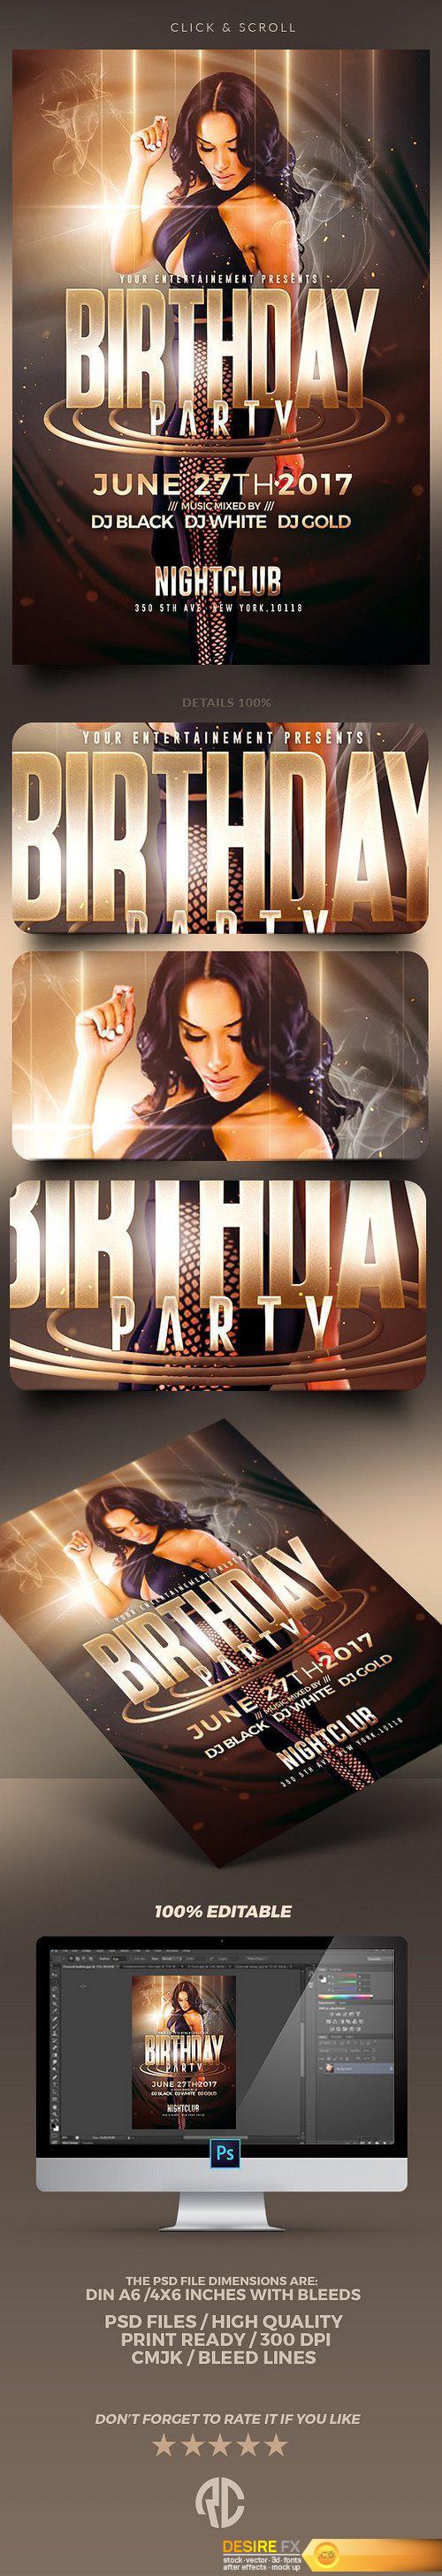 CM - Birthday Party - Flyer Template 1392350